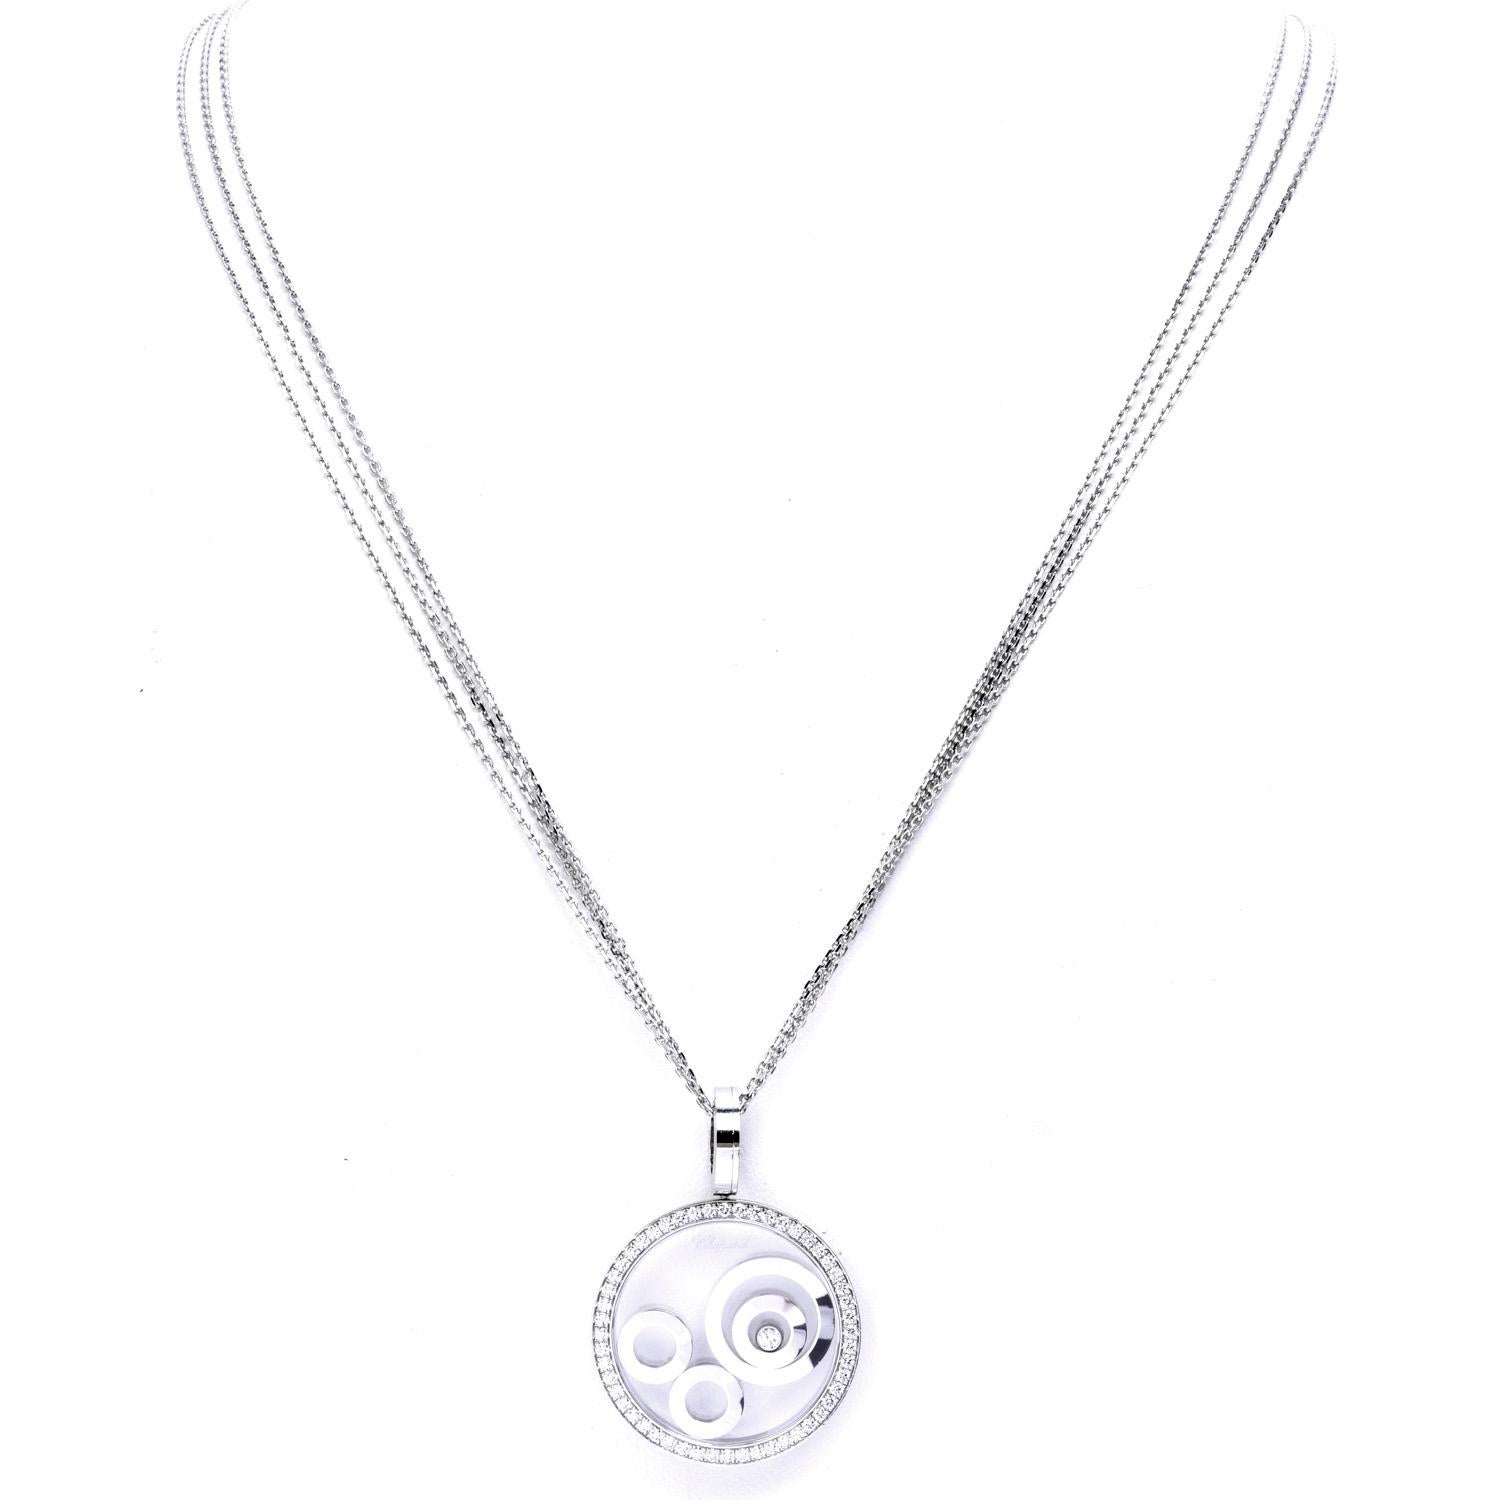 This stunning, high polished, white gold 18k circular Pendant necklace by Chopard.

The design is from the 